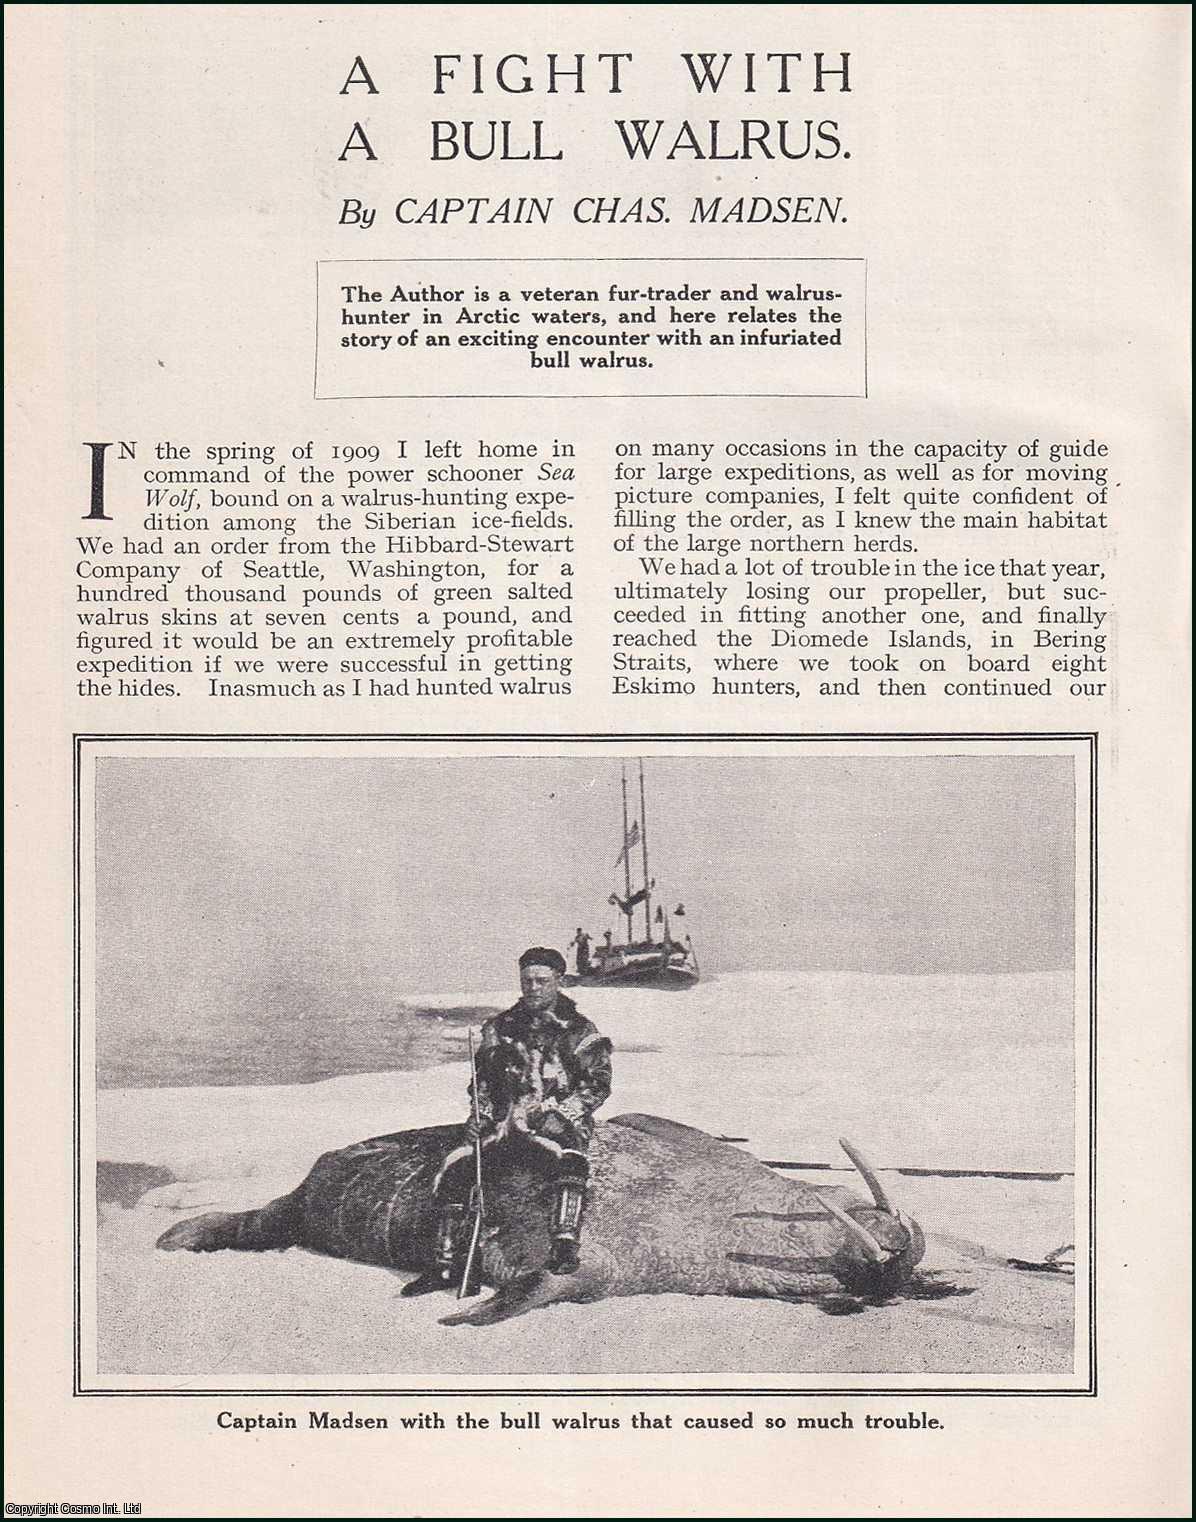 Captain Chas. Madsen - A Fight with a Bull Walrus. A verteran fur-trader and walrus-hunter in the arctic. An uncommon original article from the Wide World Magazine, 1923.